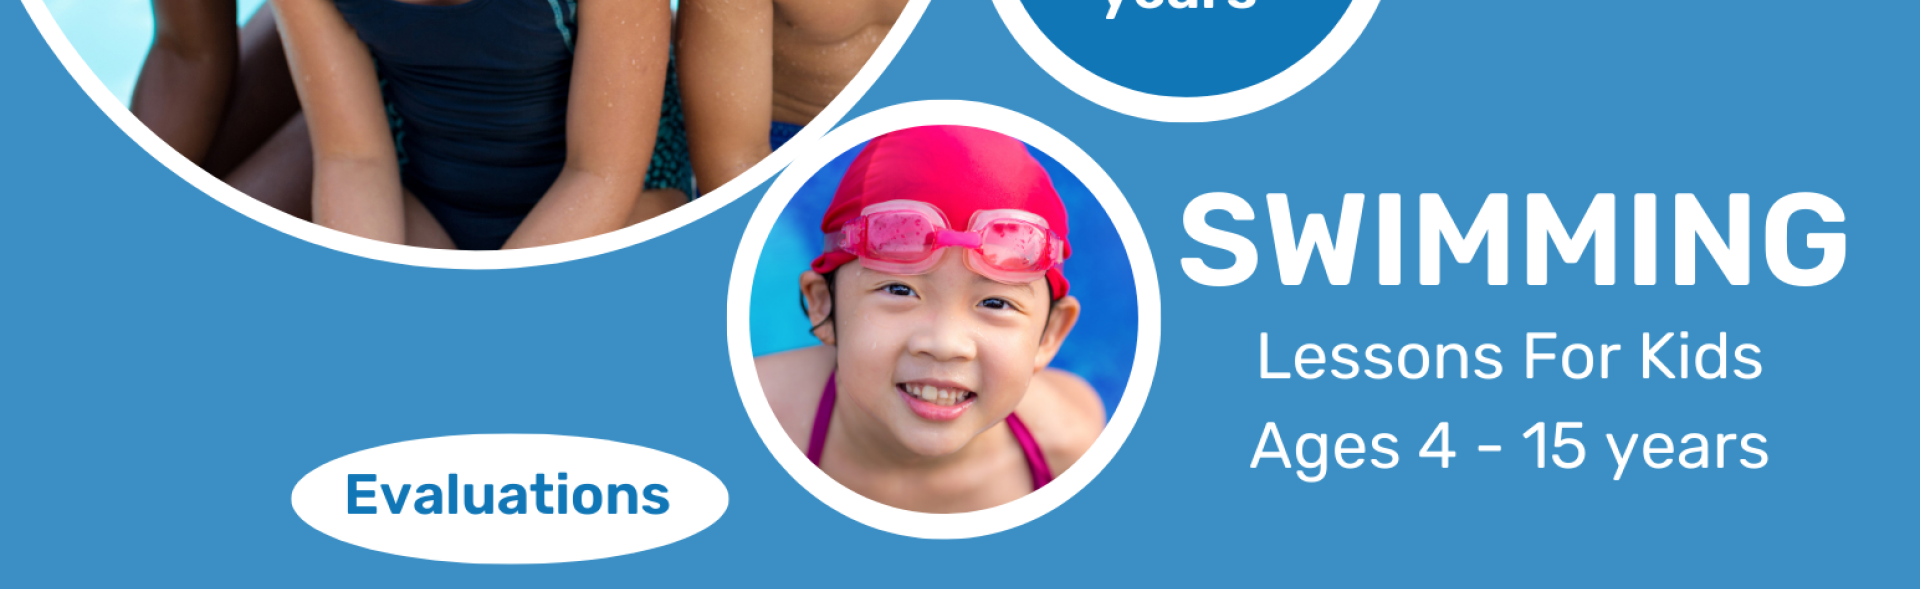 Swimming lesson flyer in English